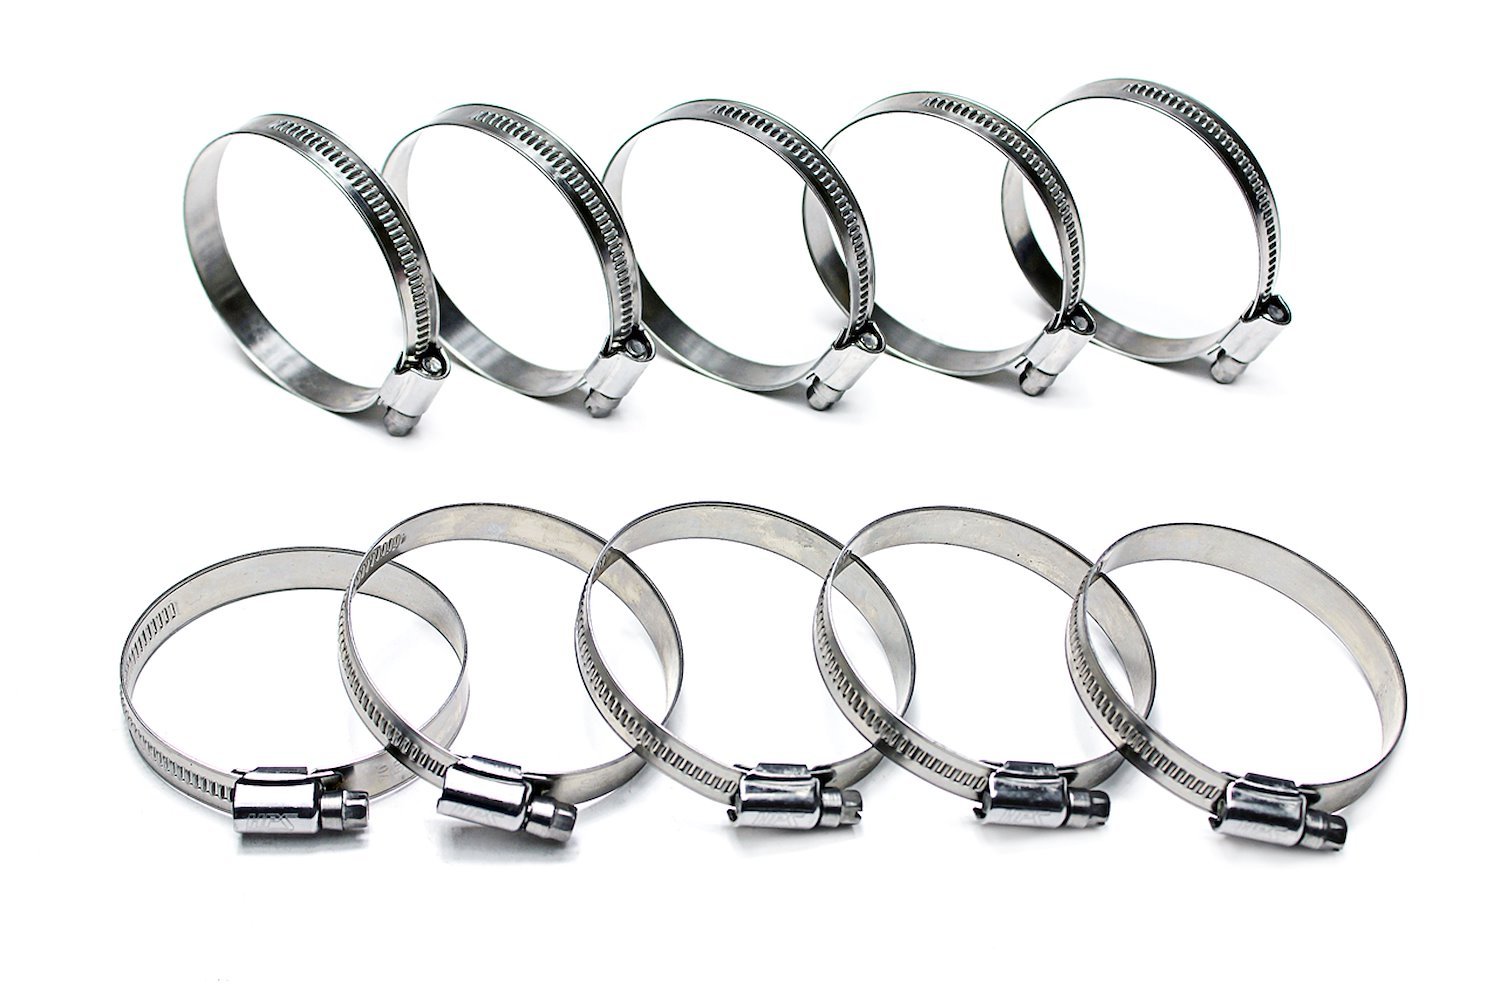 EMSC-20-32x10 Embossed Hose Clamp, Stainless Steel Embossed Hose Clamp, Size #12, Effective Range: 7/8 in.- 1-1/4 in., 10Pc